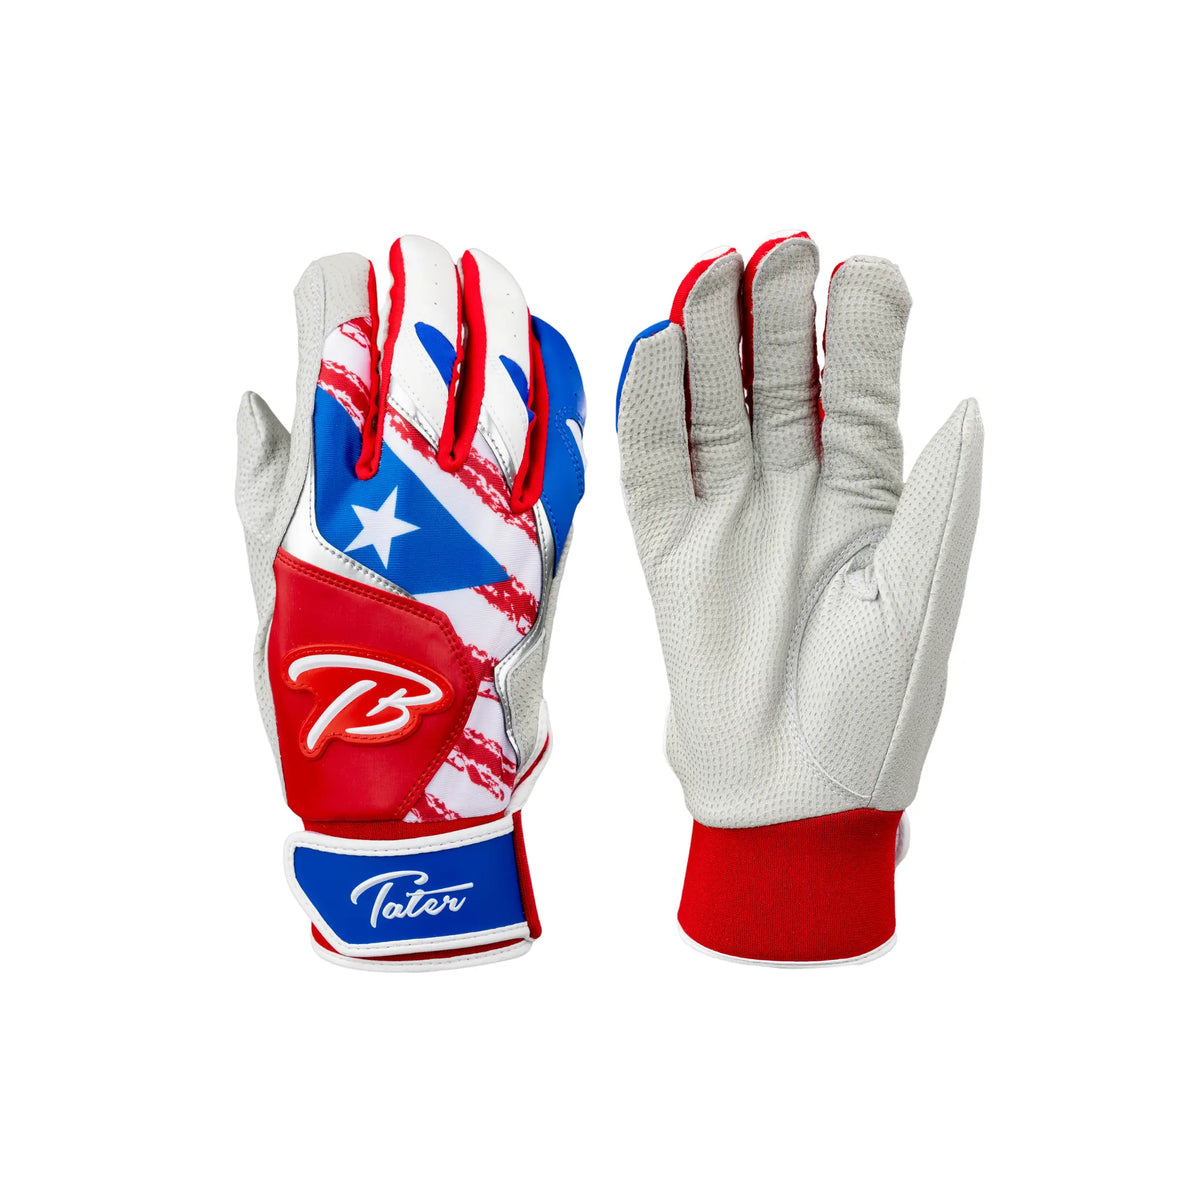 Adult-sized Tater baseball batting gloves designed with the Puerto Rican flag motif, featuring the striking red, white, and blue color scheme with a single star and the signature &#39;TB&#39; logo for a bold, patriotic statement.